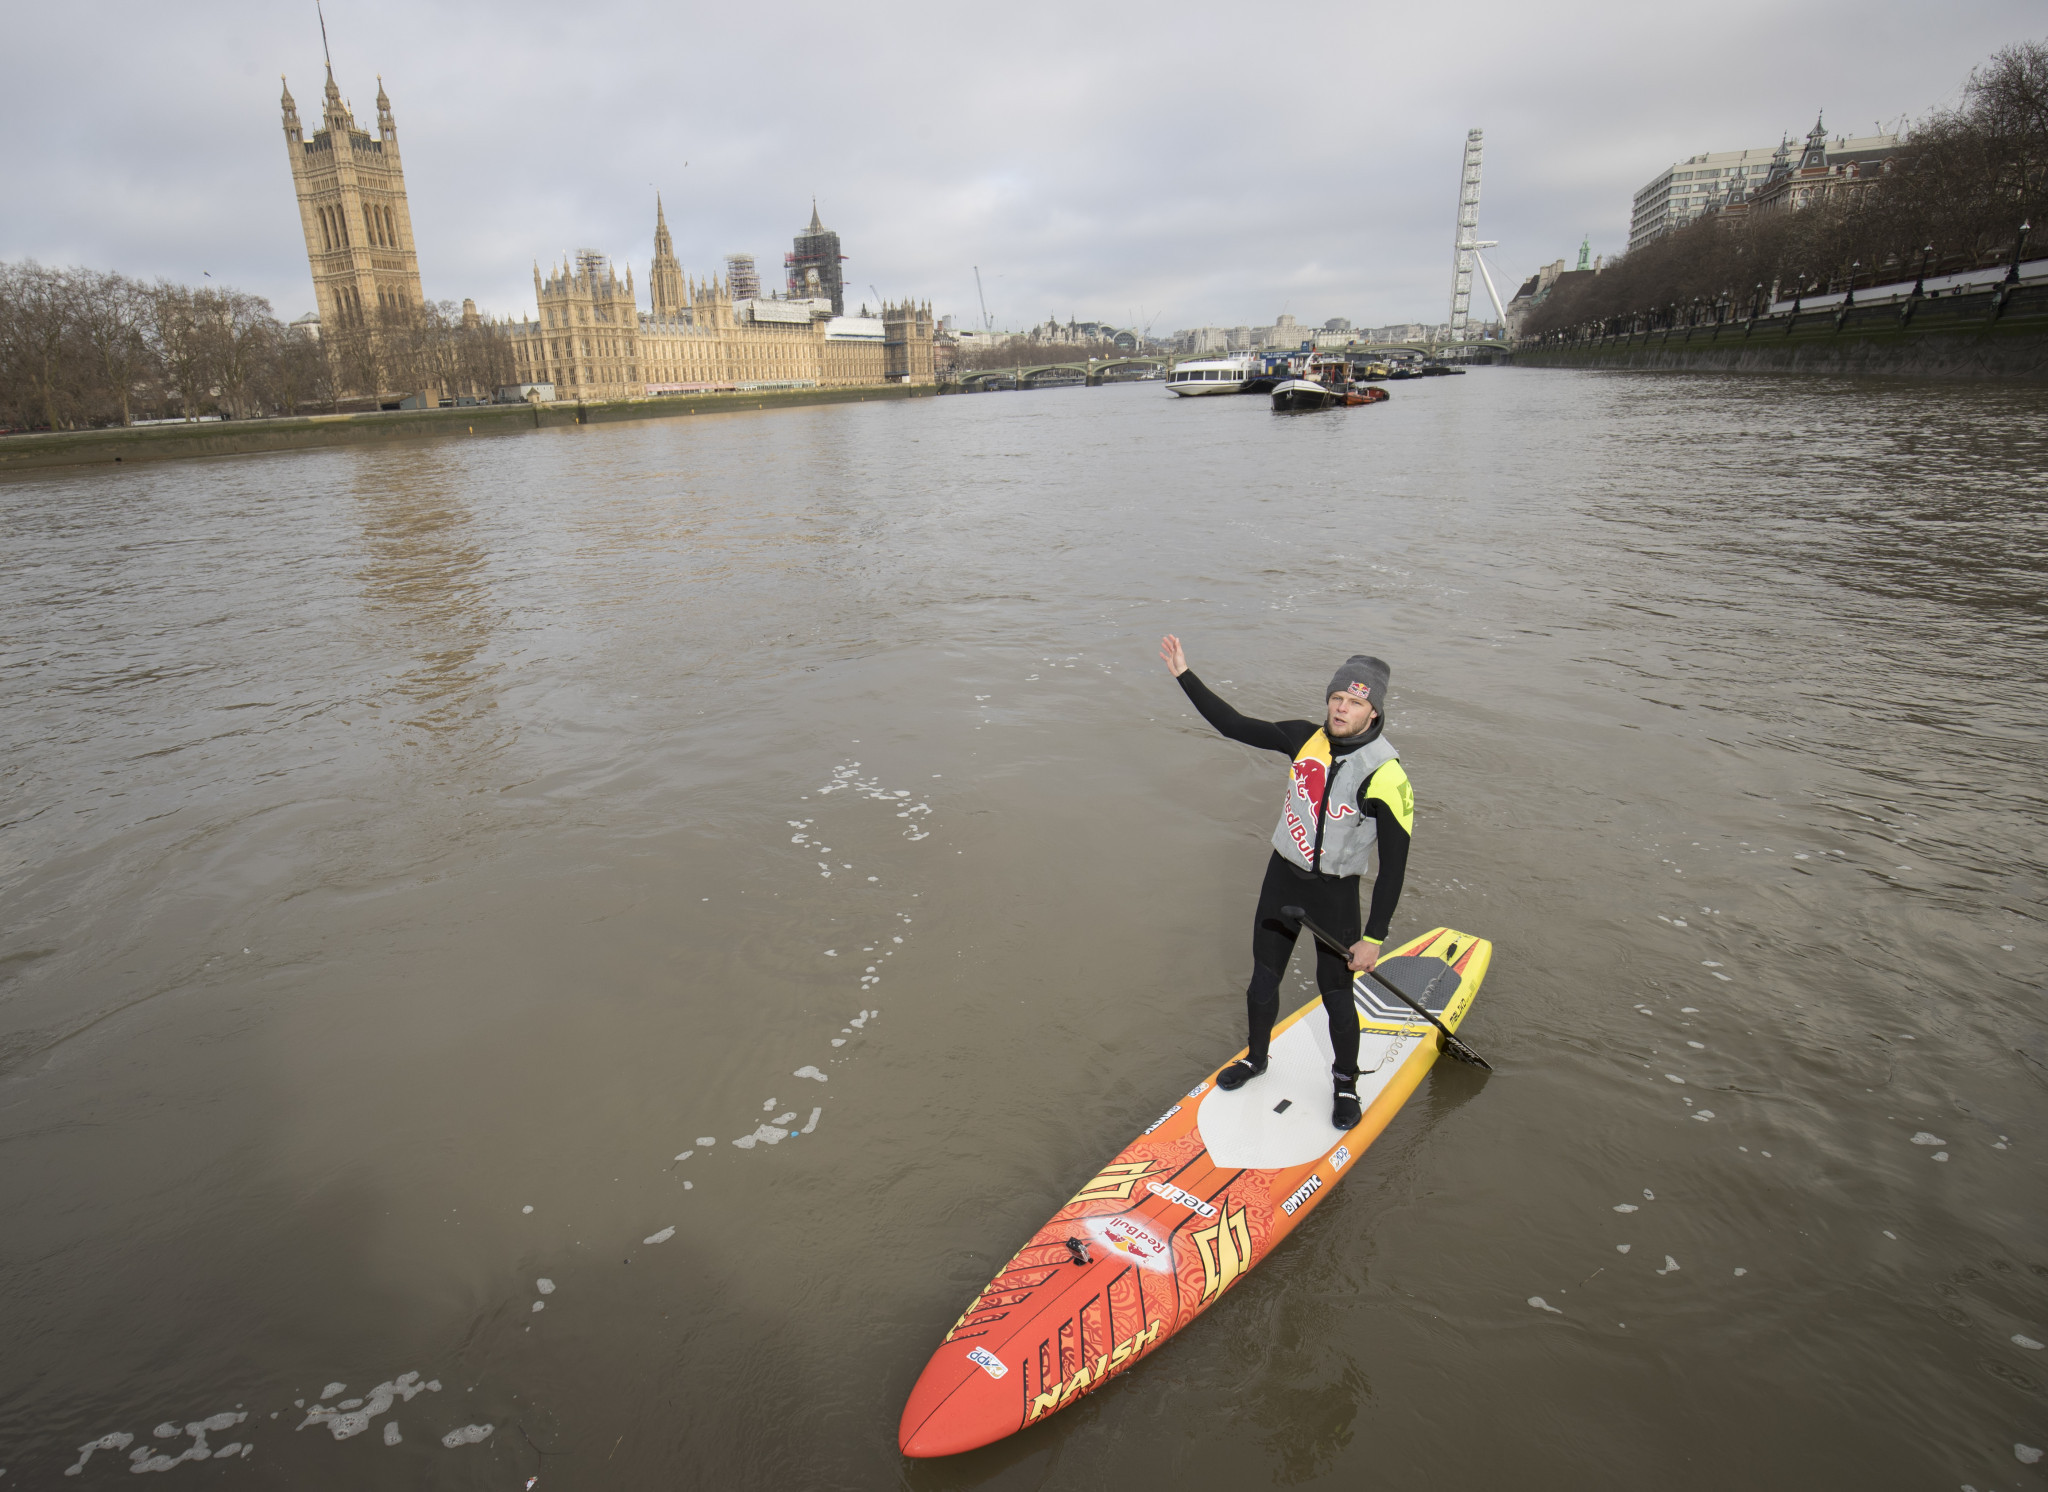 Casper Steinfath pictured paddling on the River Thames in London ©Getty Images